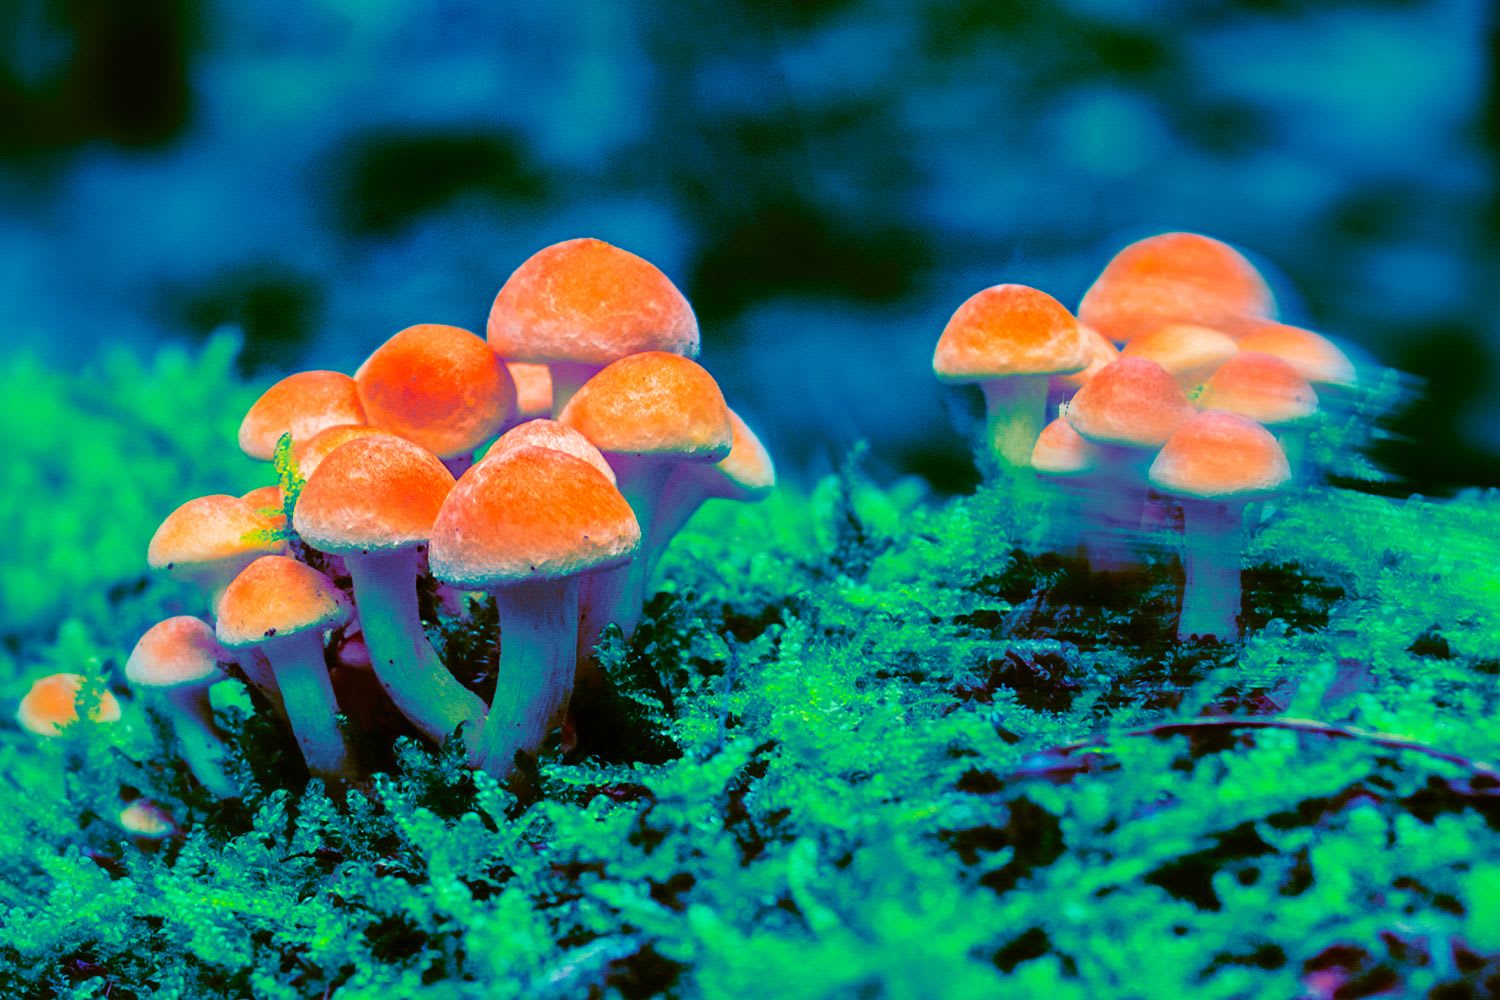 Here’s your guide to medicinal mushrooms